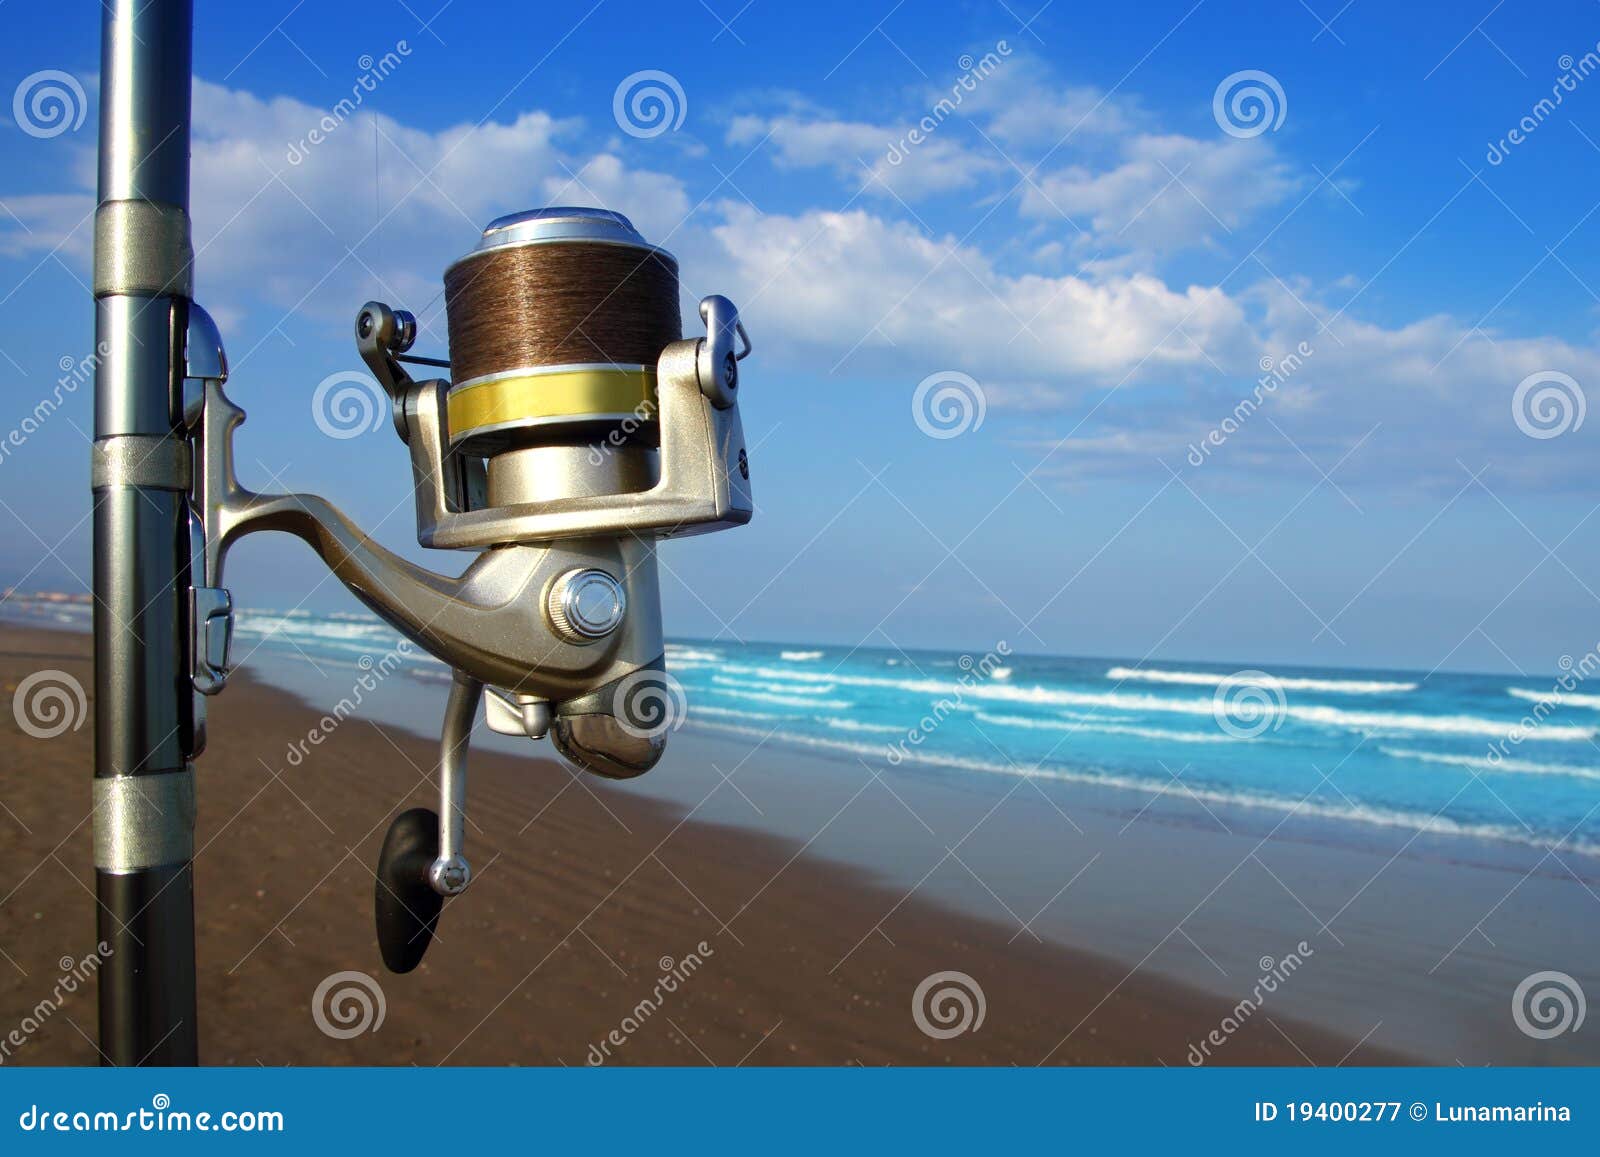 Beach Surfcasting Spinning Fishing Reel and Rod Stock Image